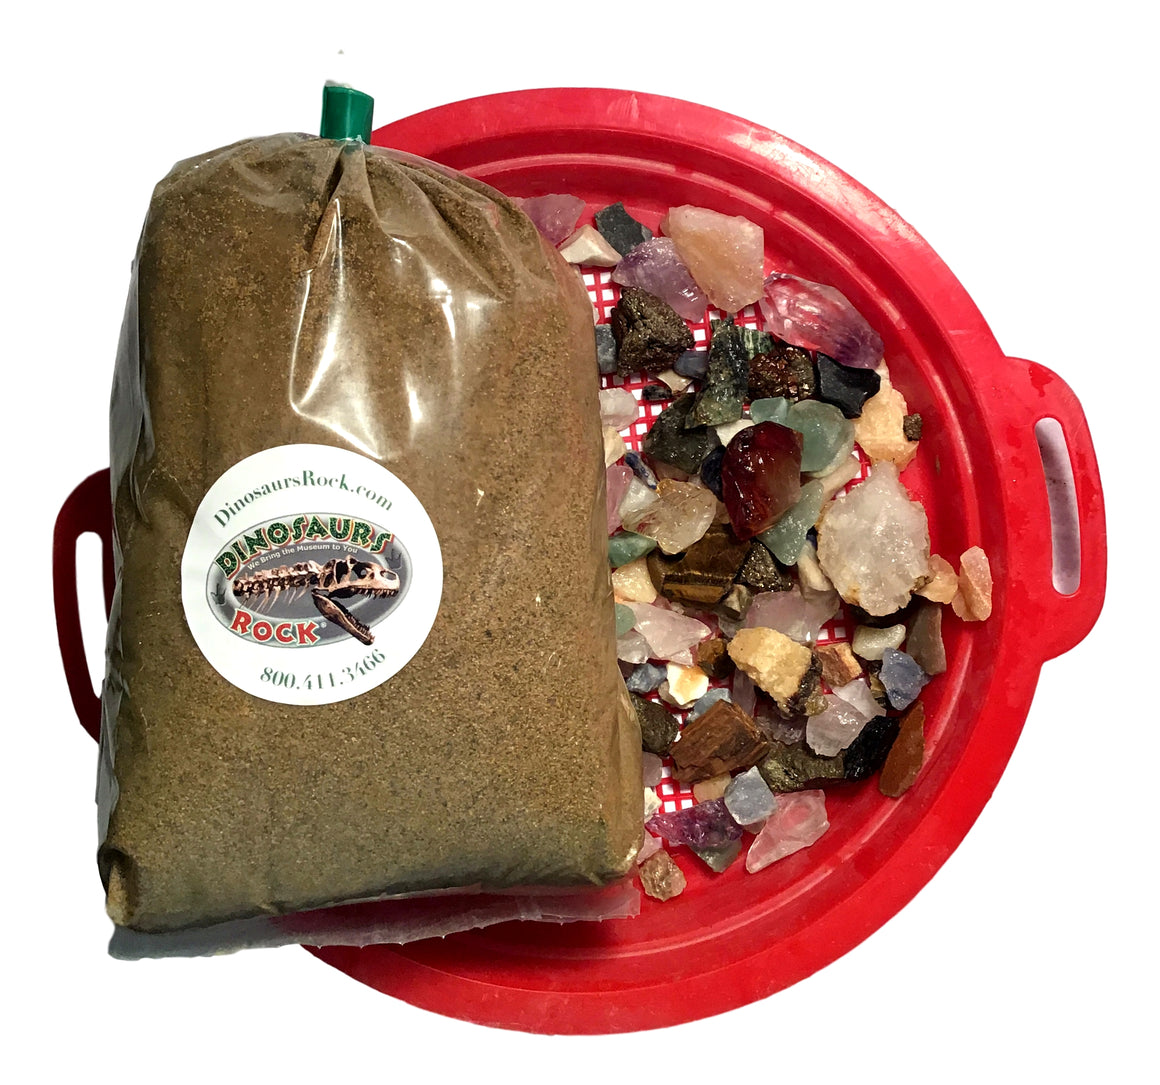 Gemstone Mining Prospecting Kit - 5 lb Sluice Bag and Sand Sifter - Dozens of Real Minerals and Gemstones